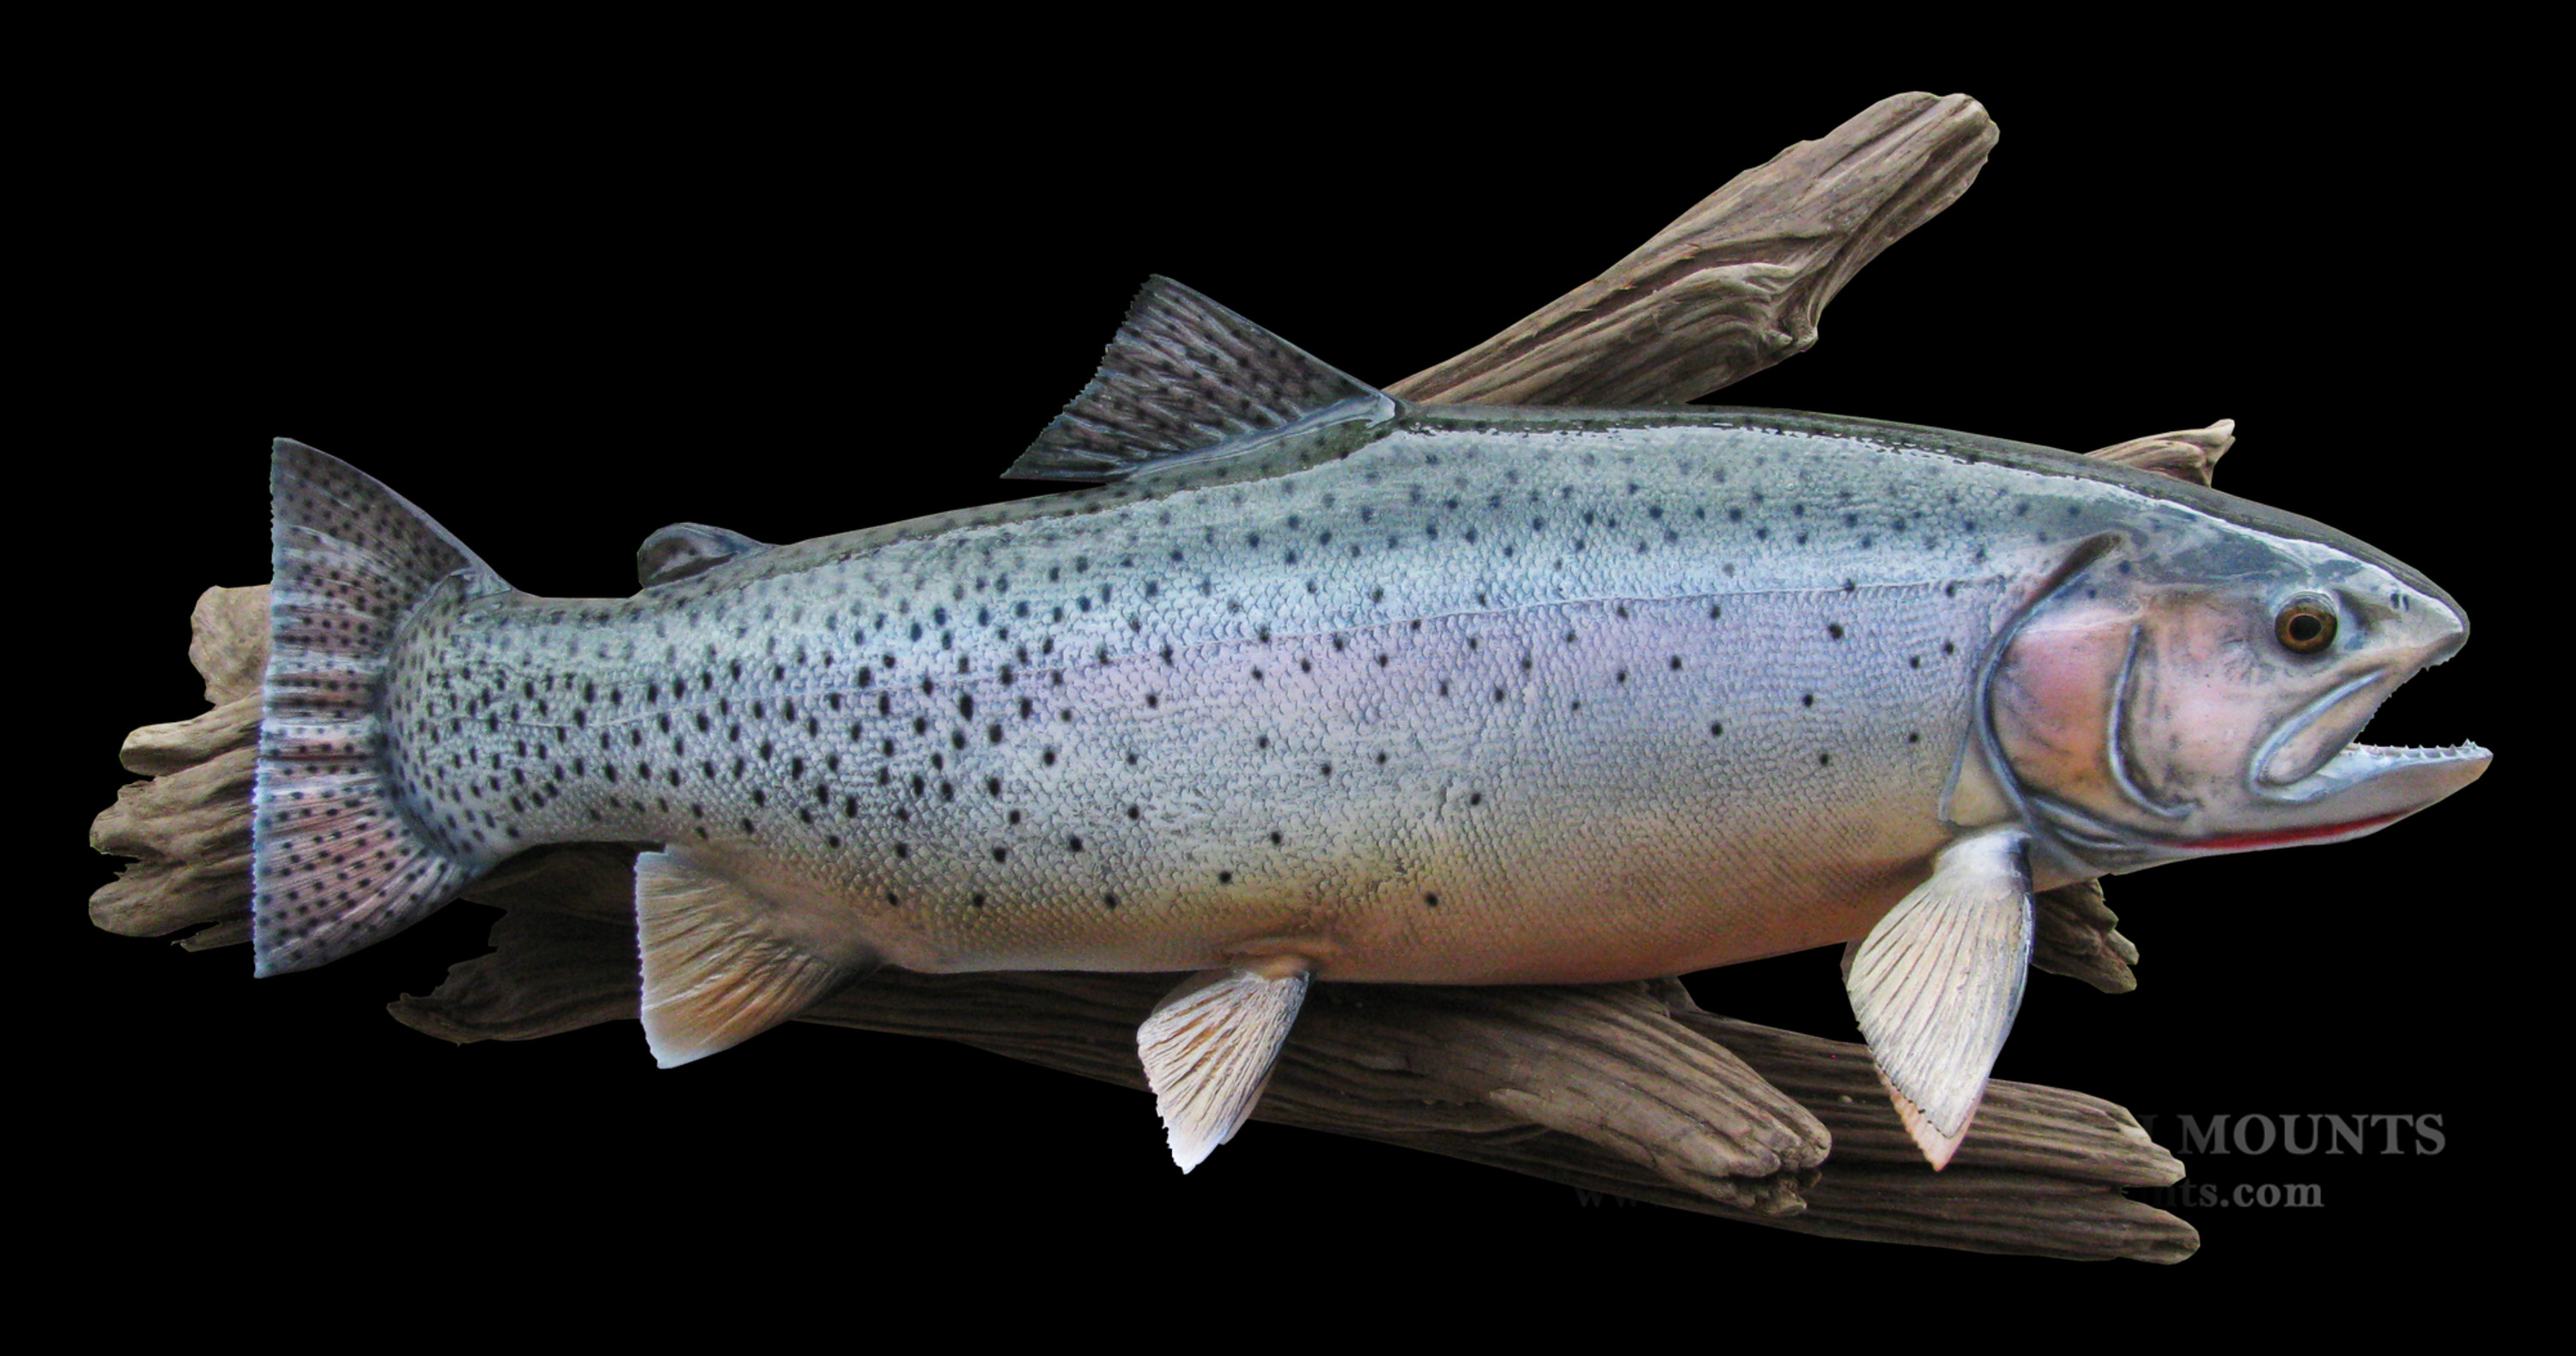 Cutthroat Trout Fish Mounts & Replicas by Coast-to-Coast Fish Mounts